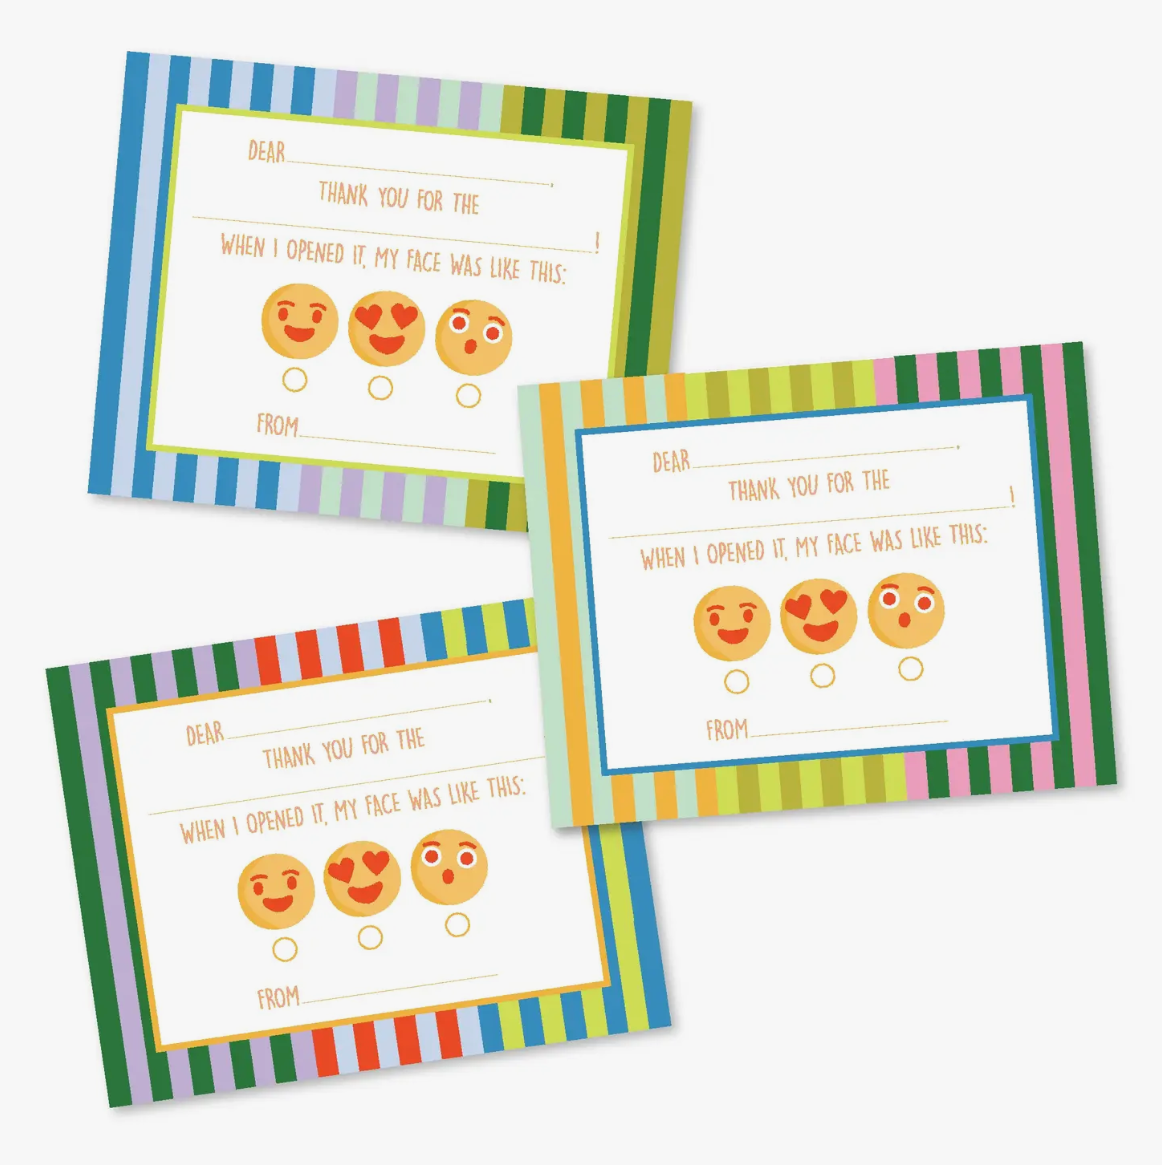 KIDDOS CARDS: 12 FILL-IN-THE-BLANK THANK YOU NOTES